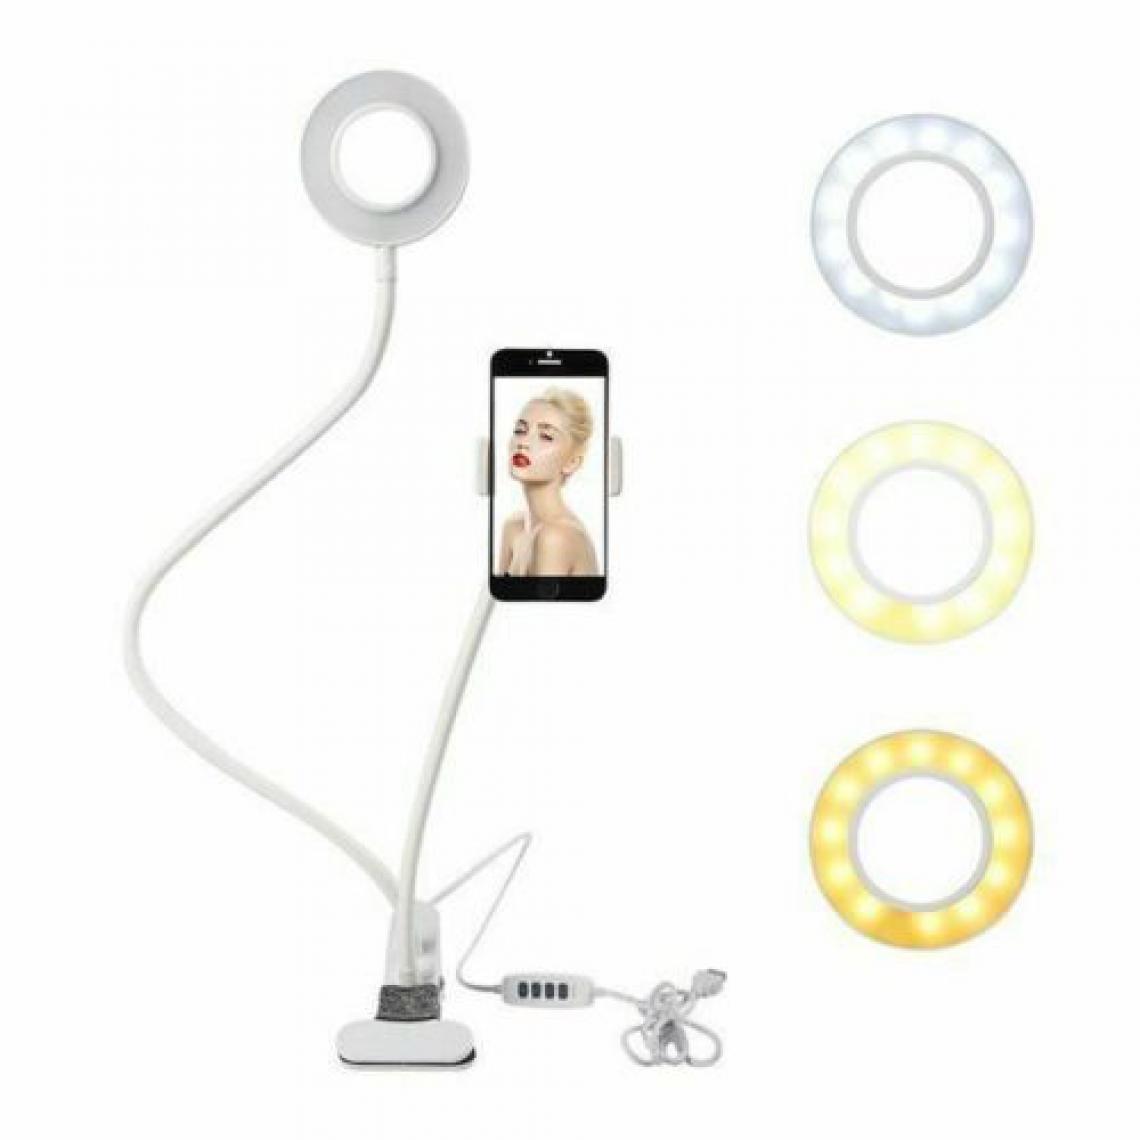 Ozzzo - Stand support bureau selfie led ozzzo blanc pour APPLE iPhone 4 4S - Station d'accueil smartphone